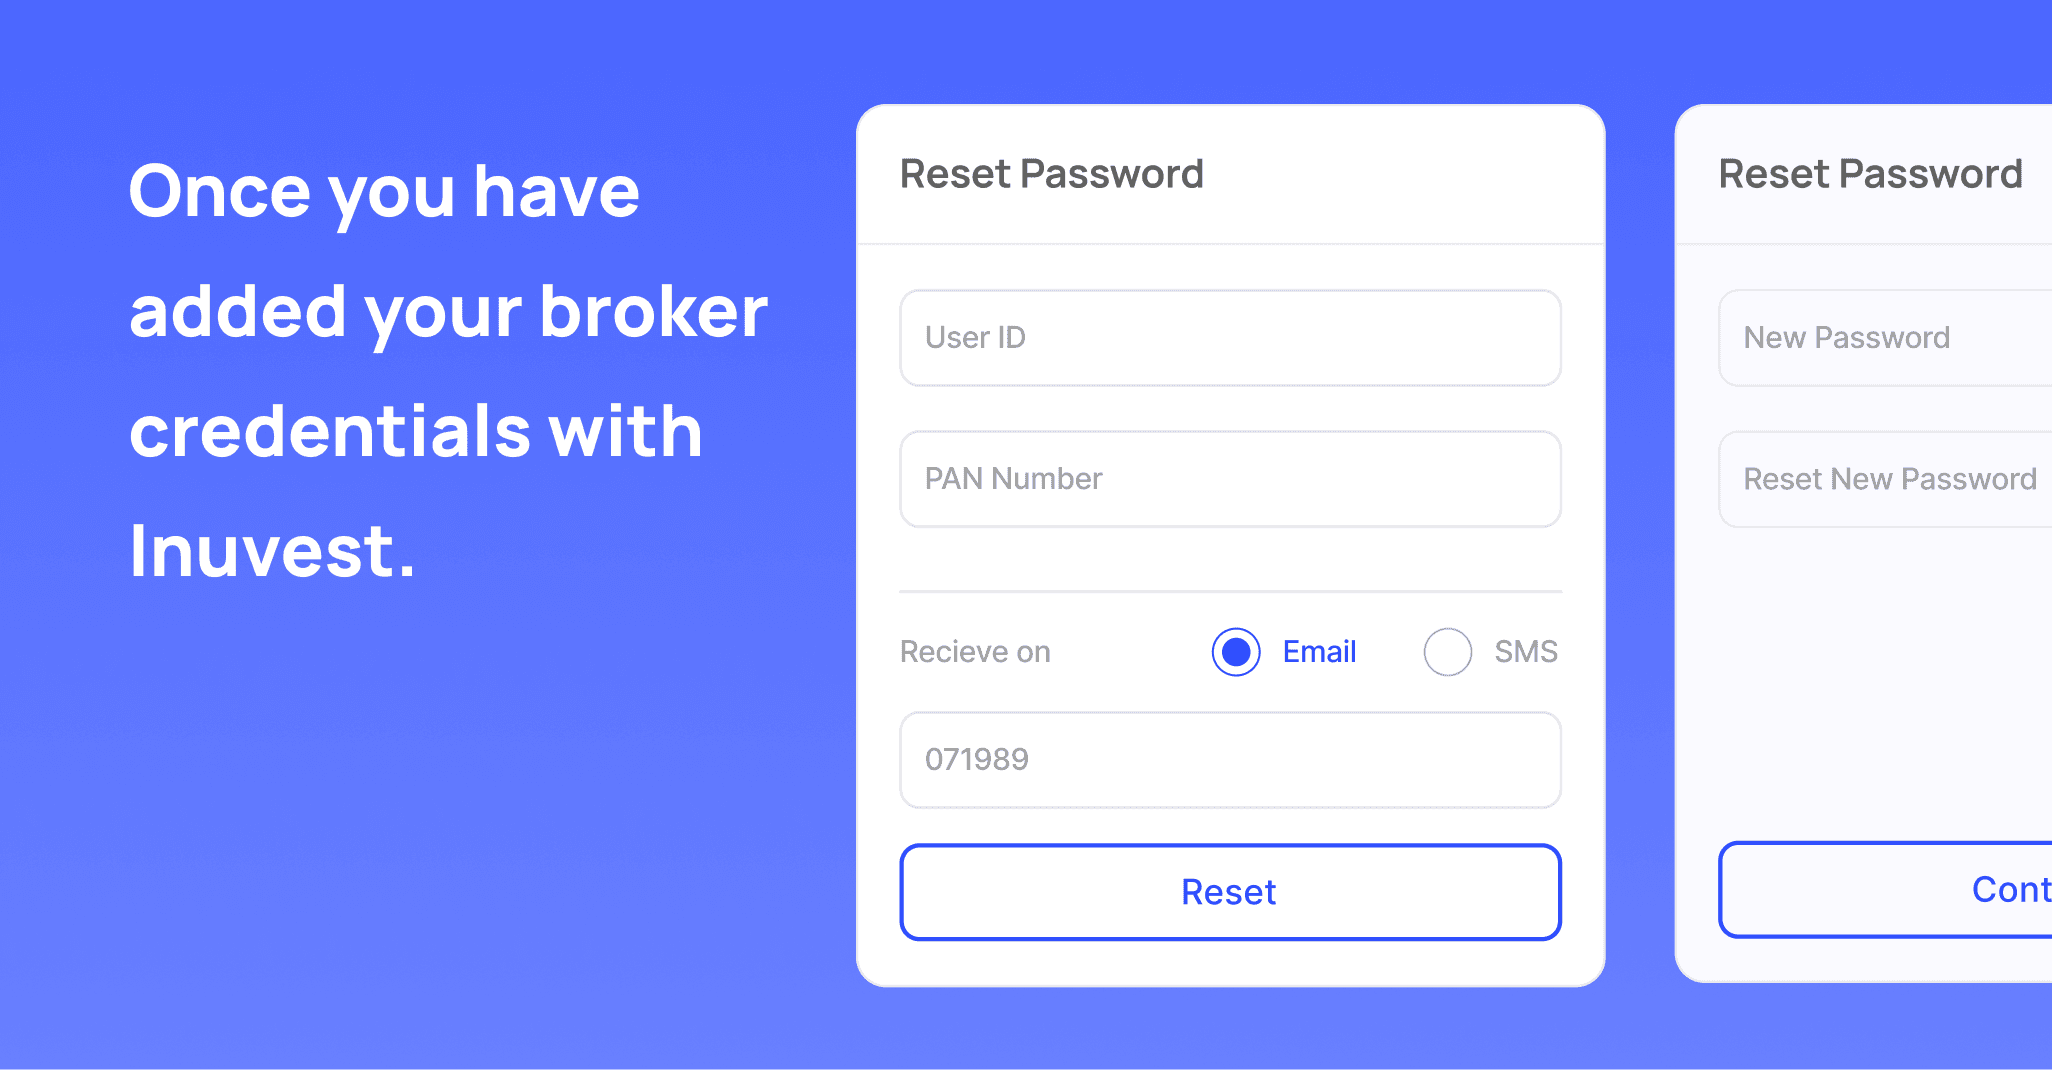 Once you have added your broker credentials with Inuvest. 